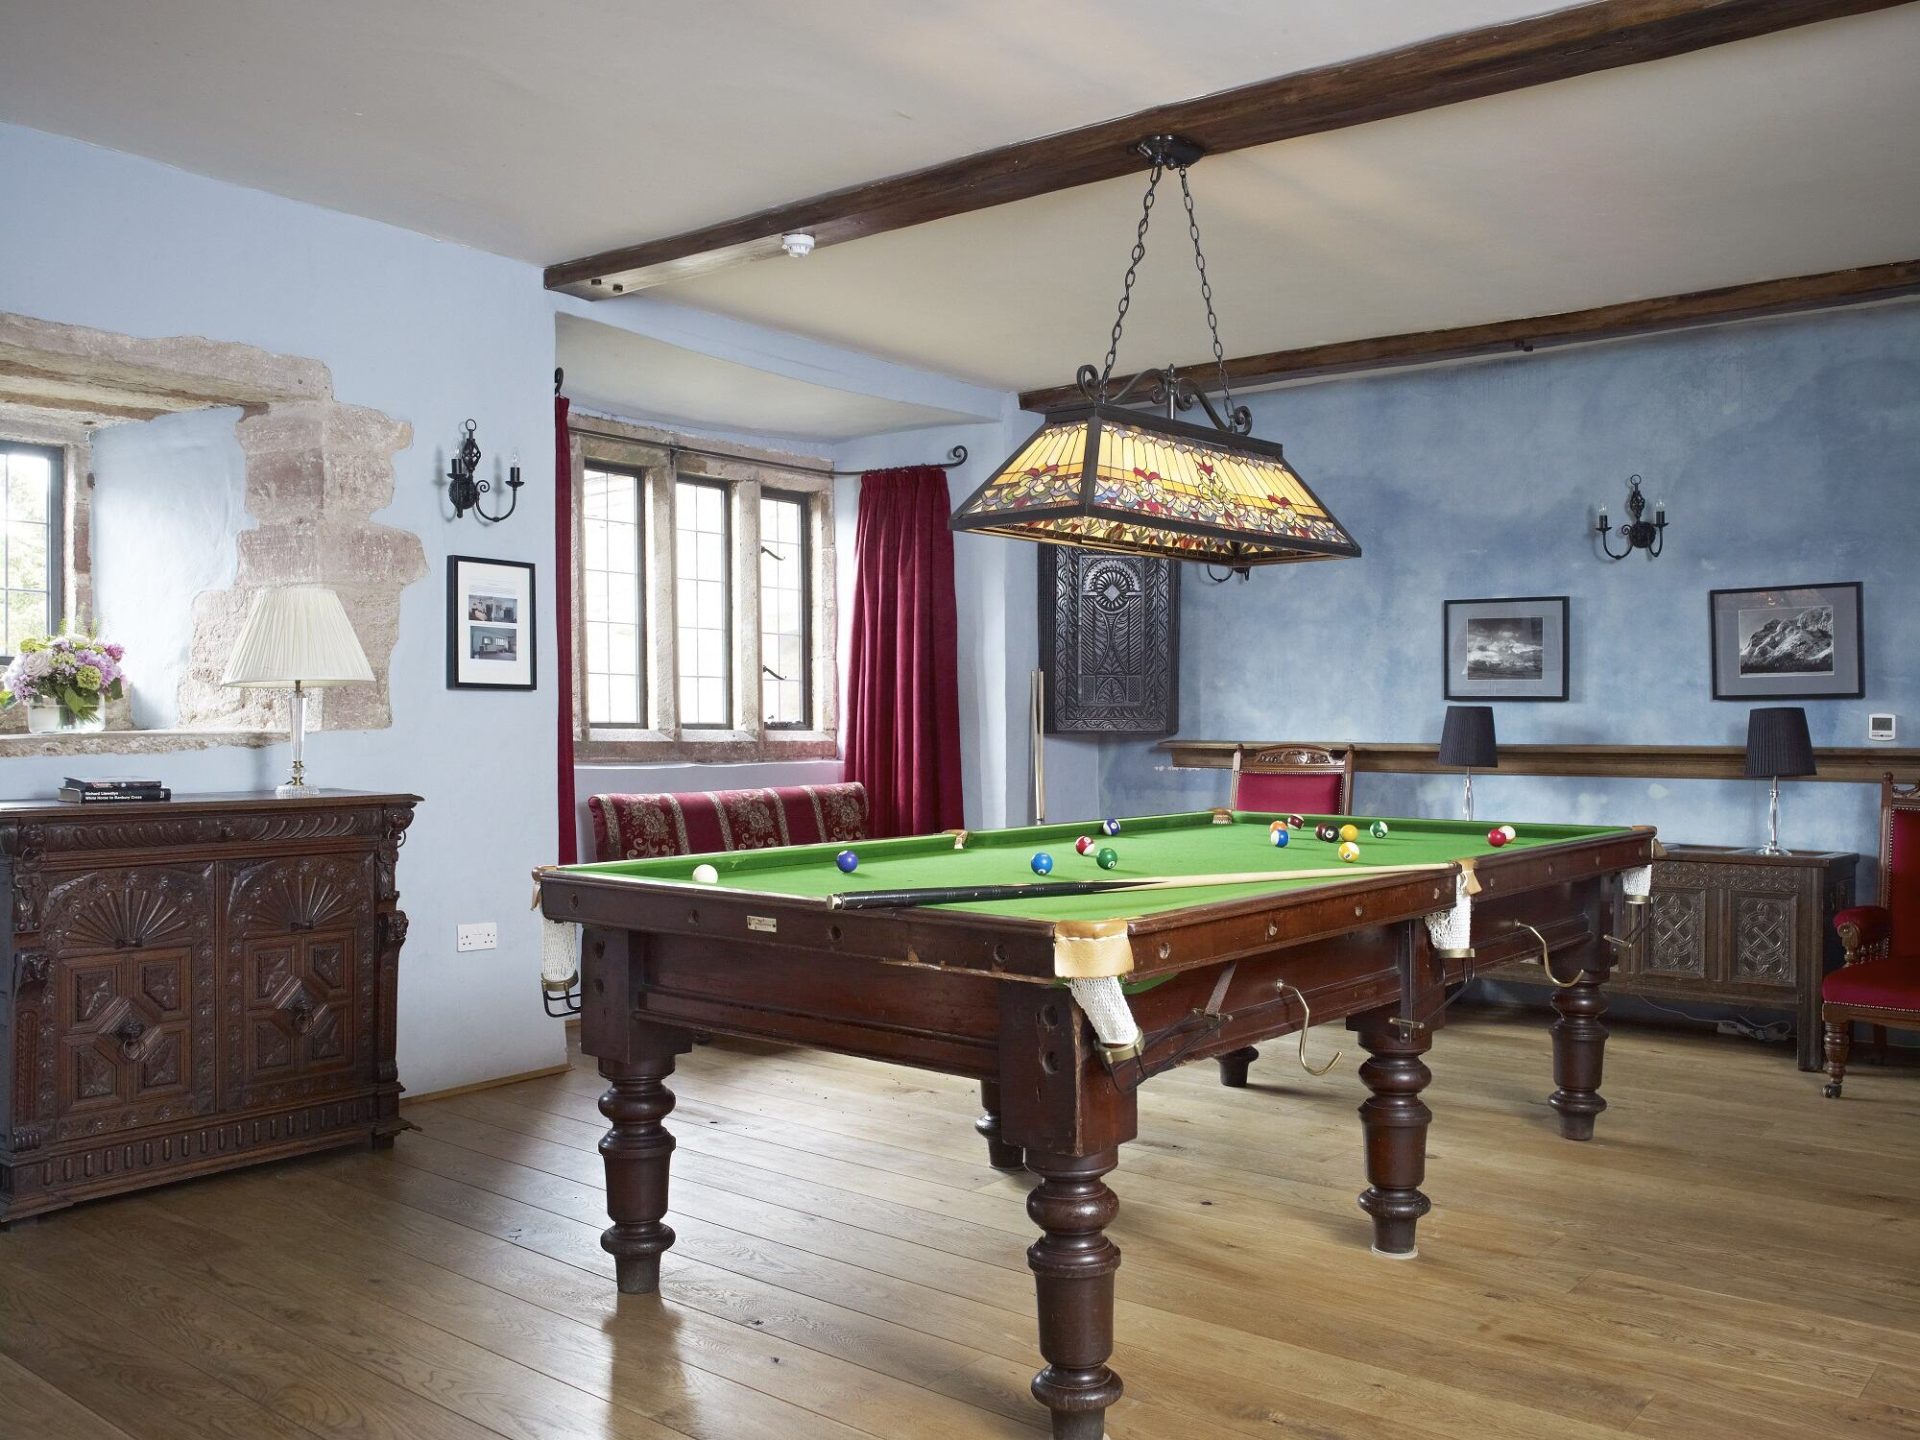 blencowe-hall-snooker-table-large-group-accommodation-near-lake-district